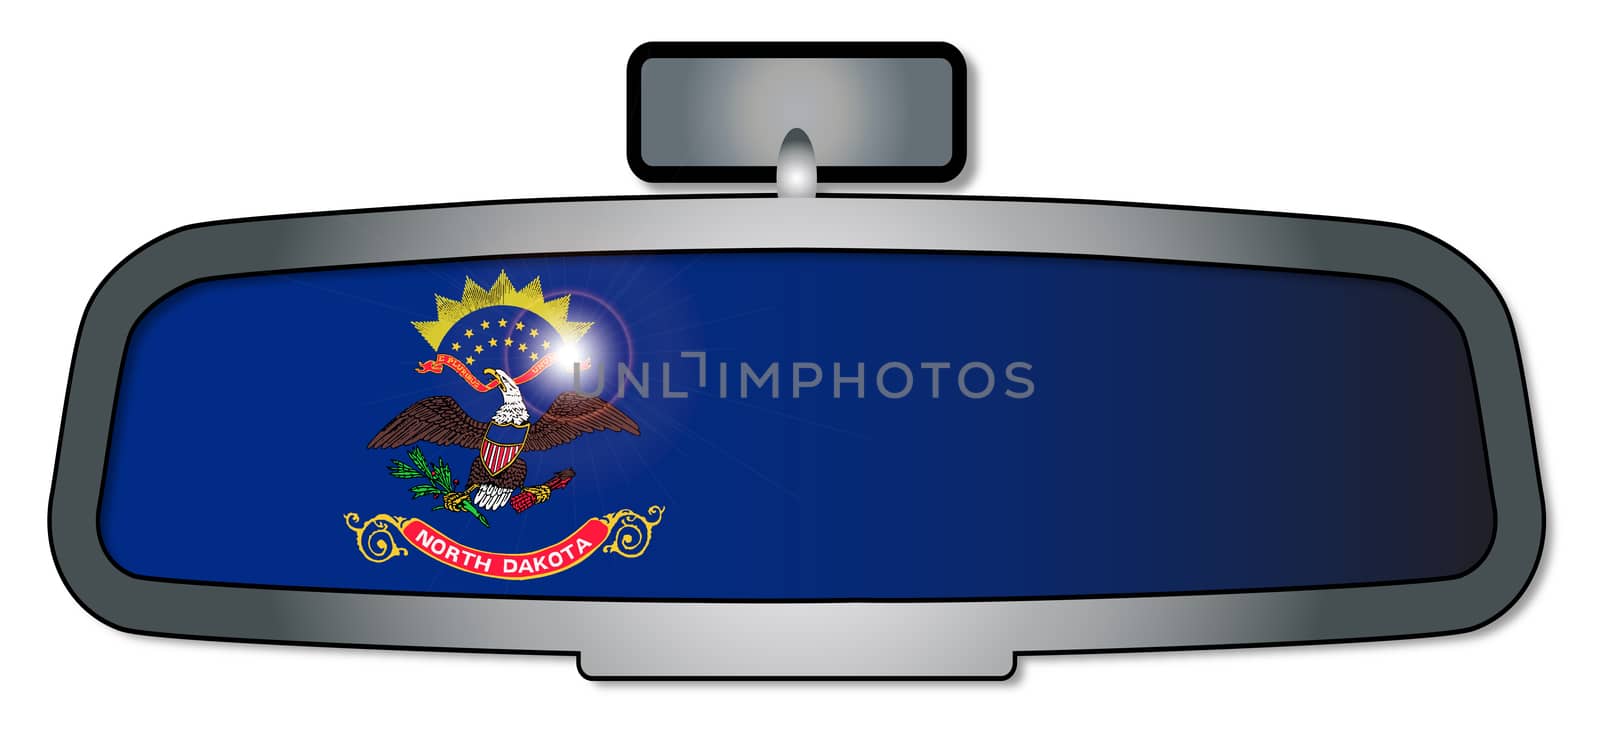 A vehicle rear view mirror with the flag of the state of North Dakota